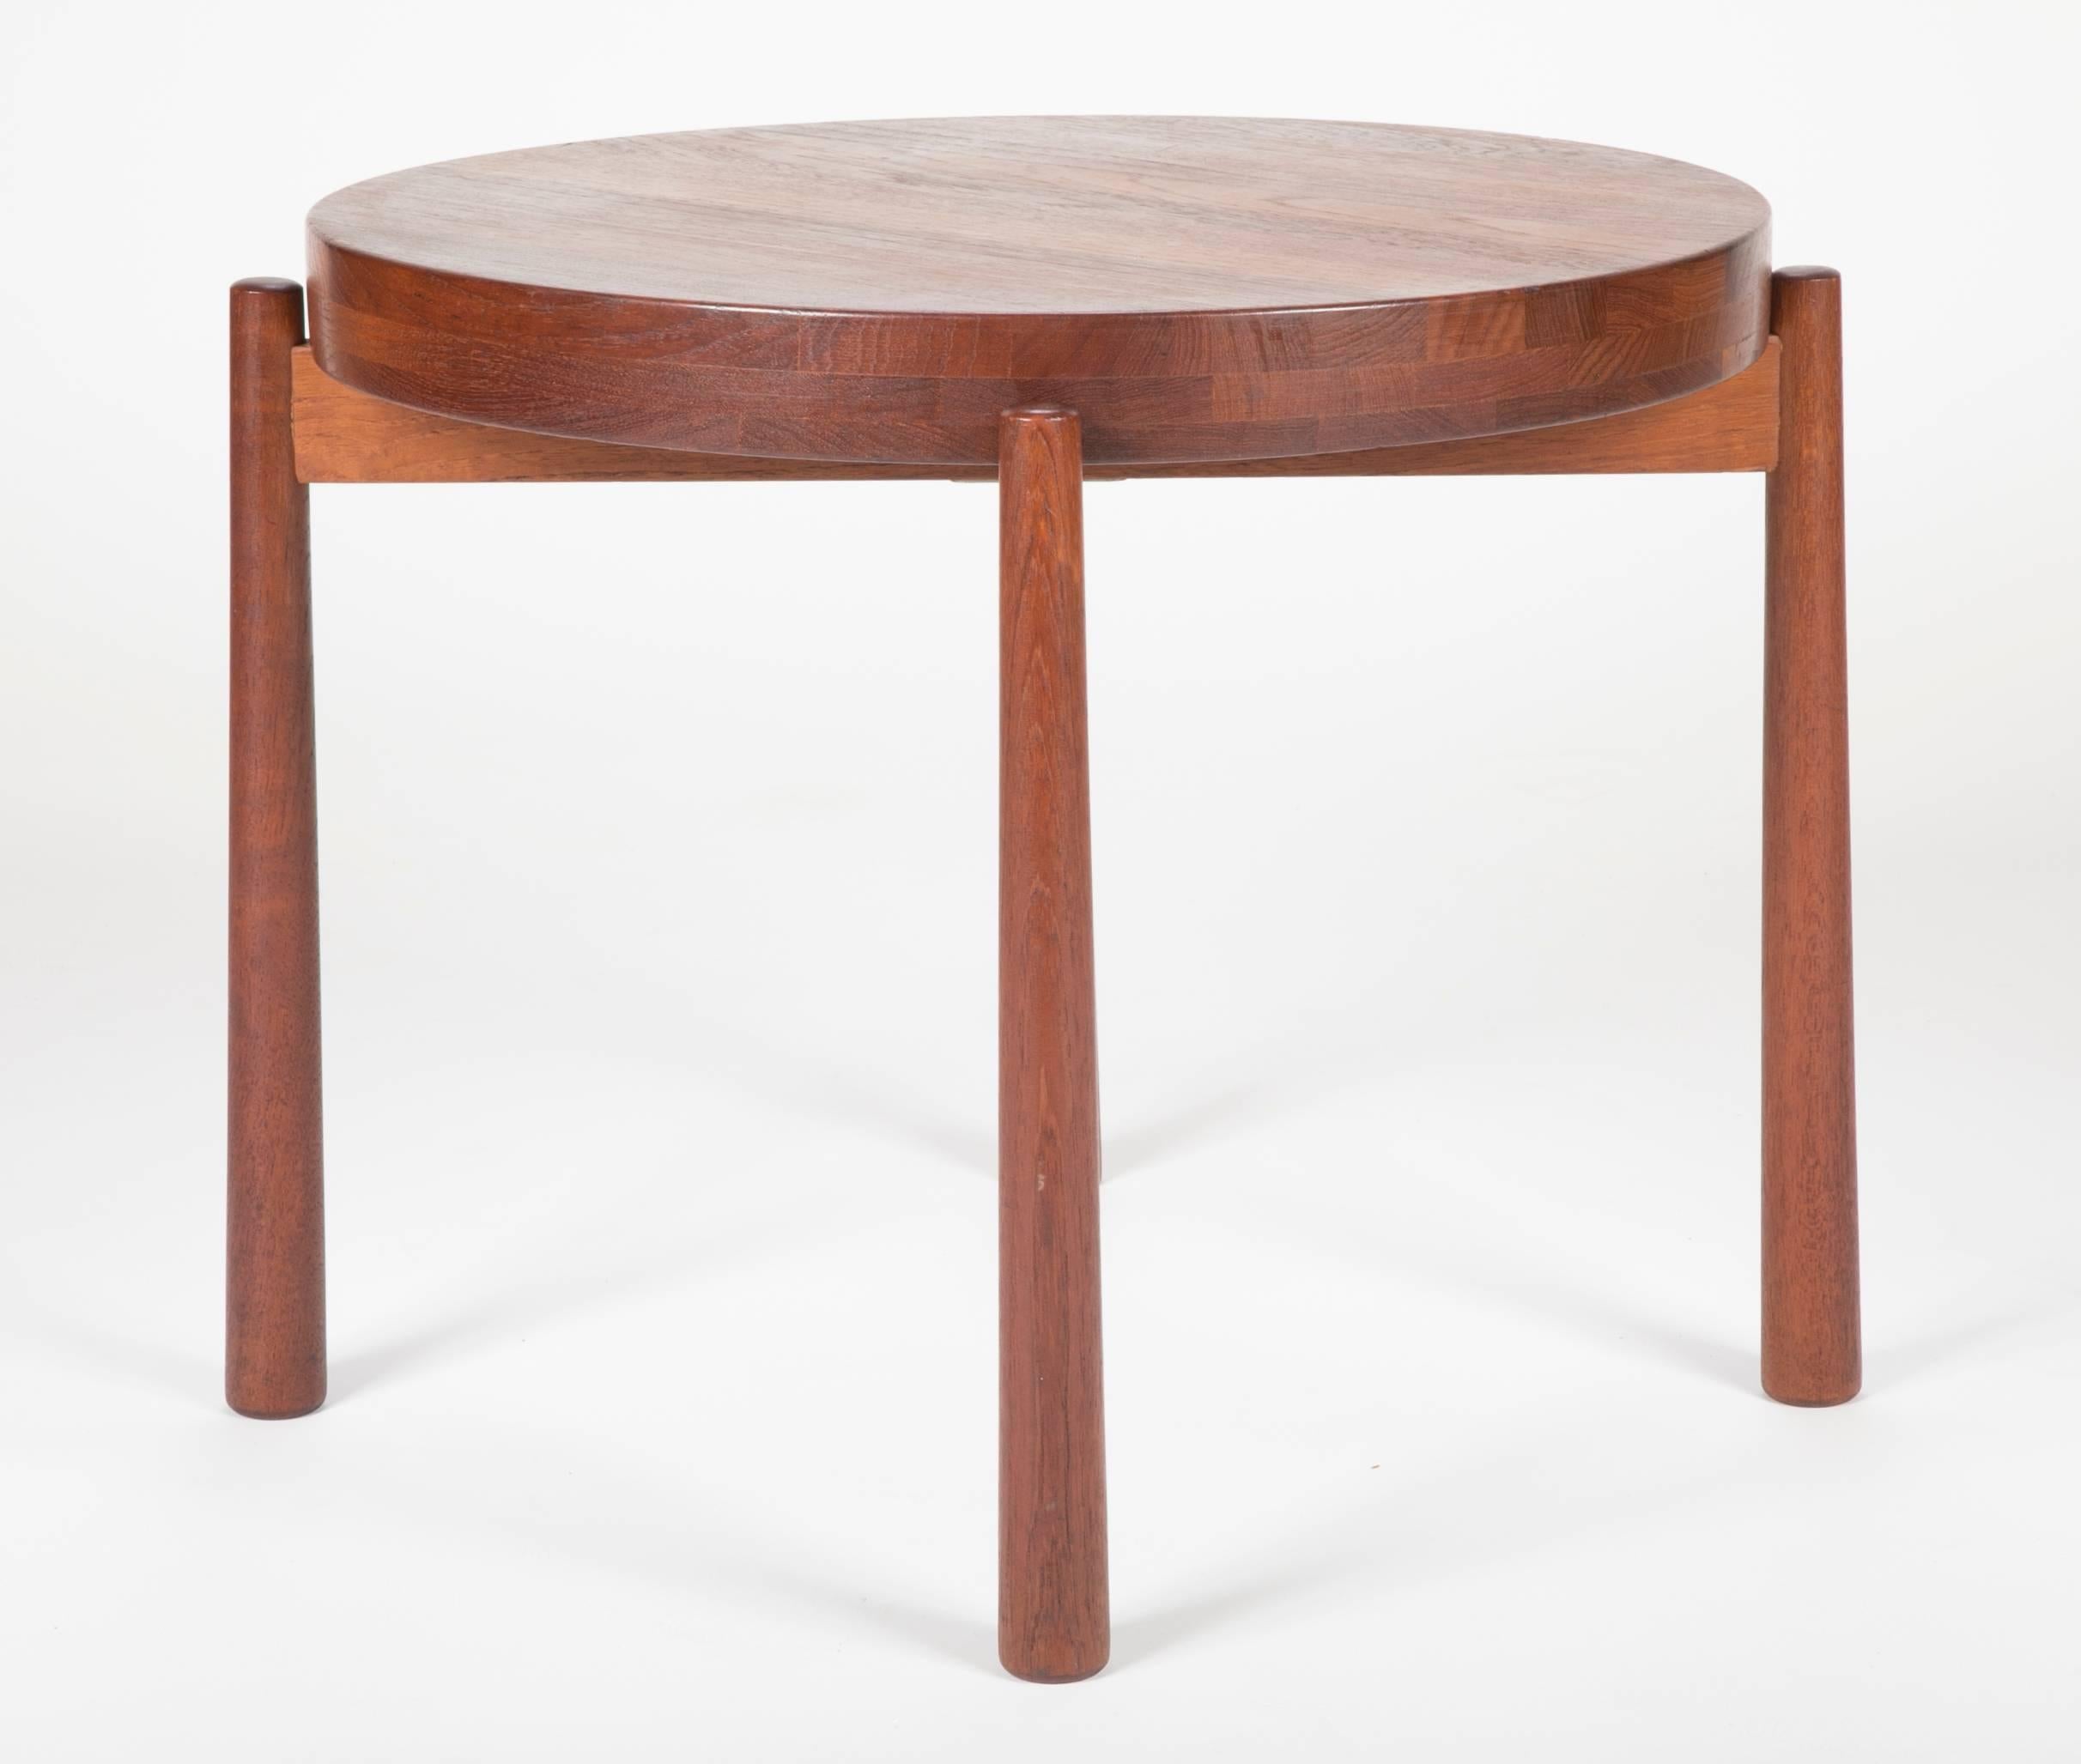 20th Century Pair of Midcentury Teak Side Tables, style of  Jens Quistgaard for DUX